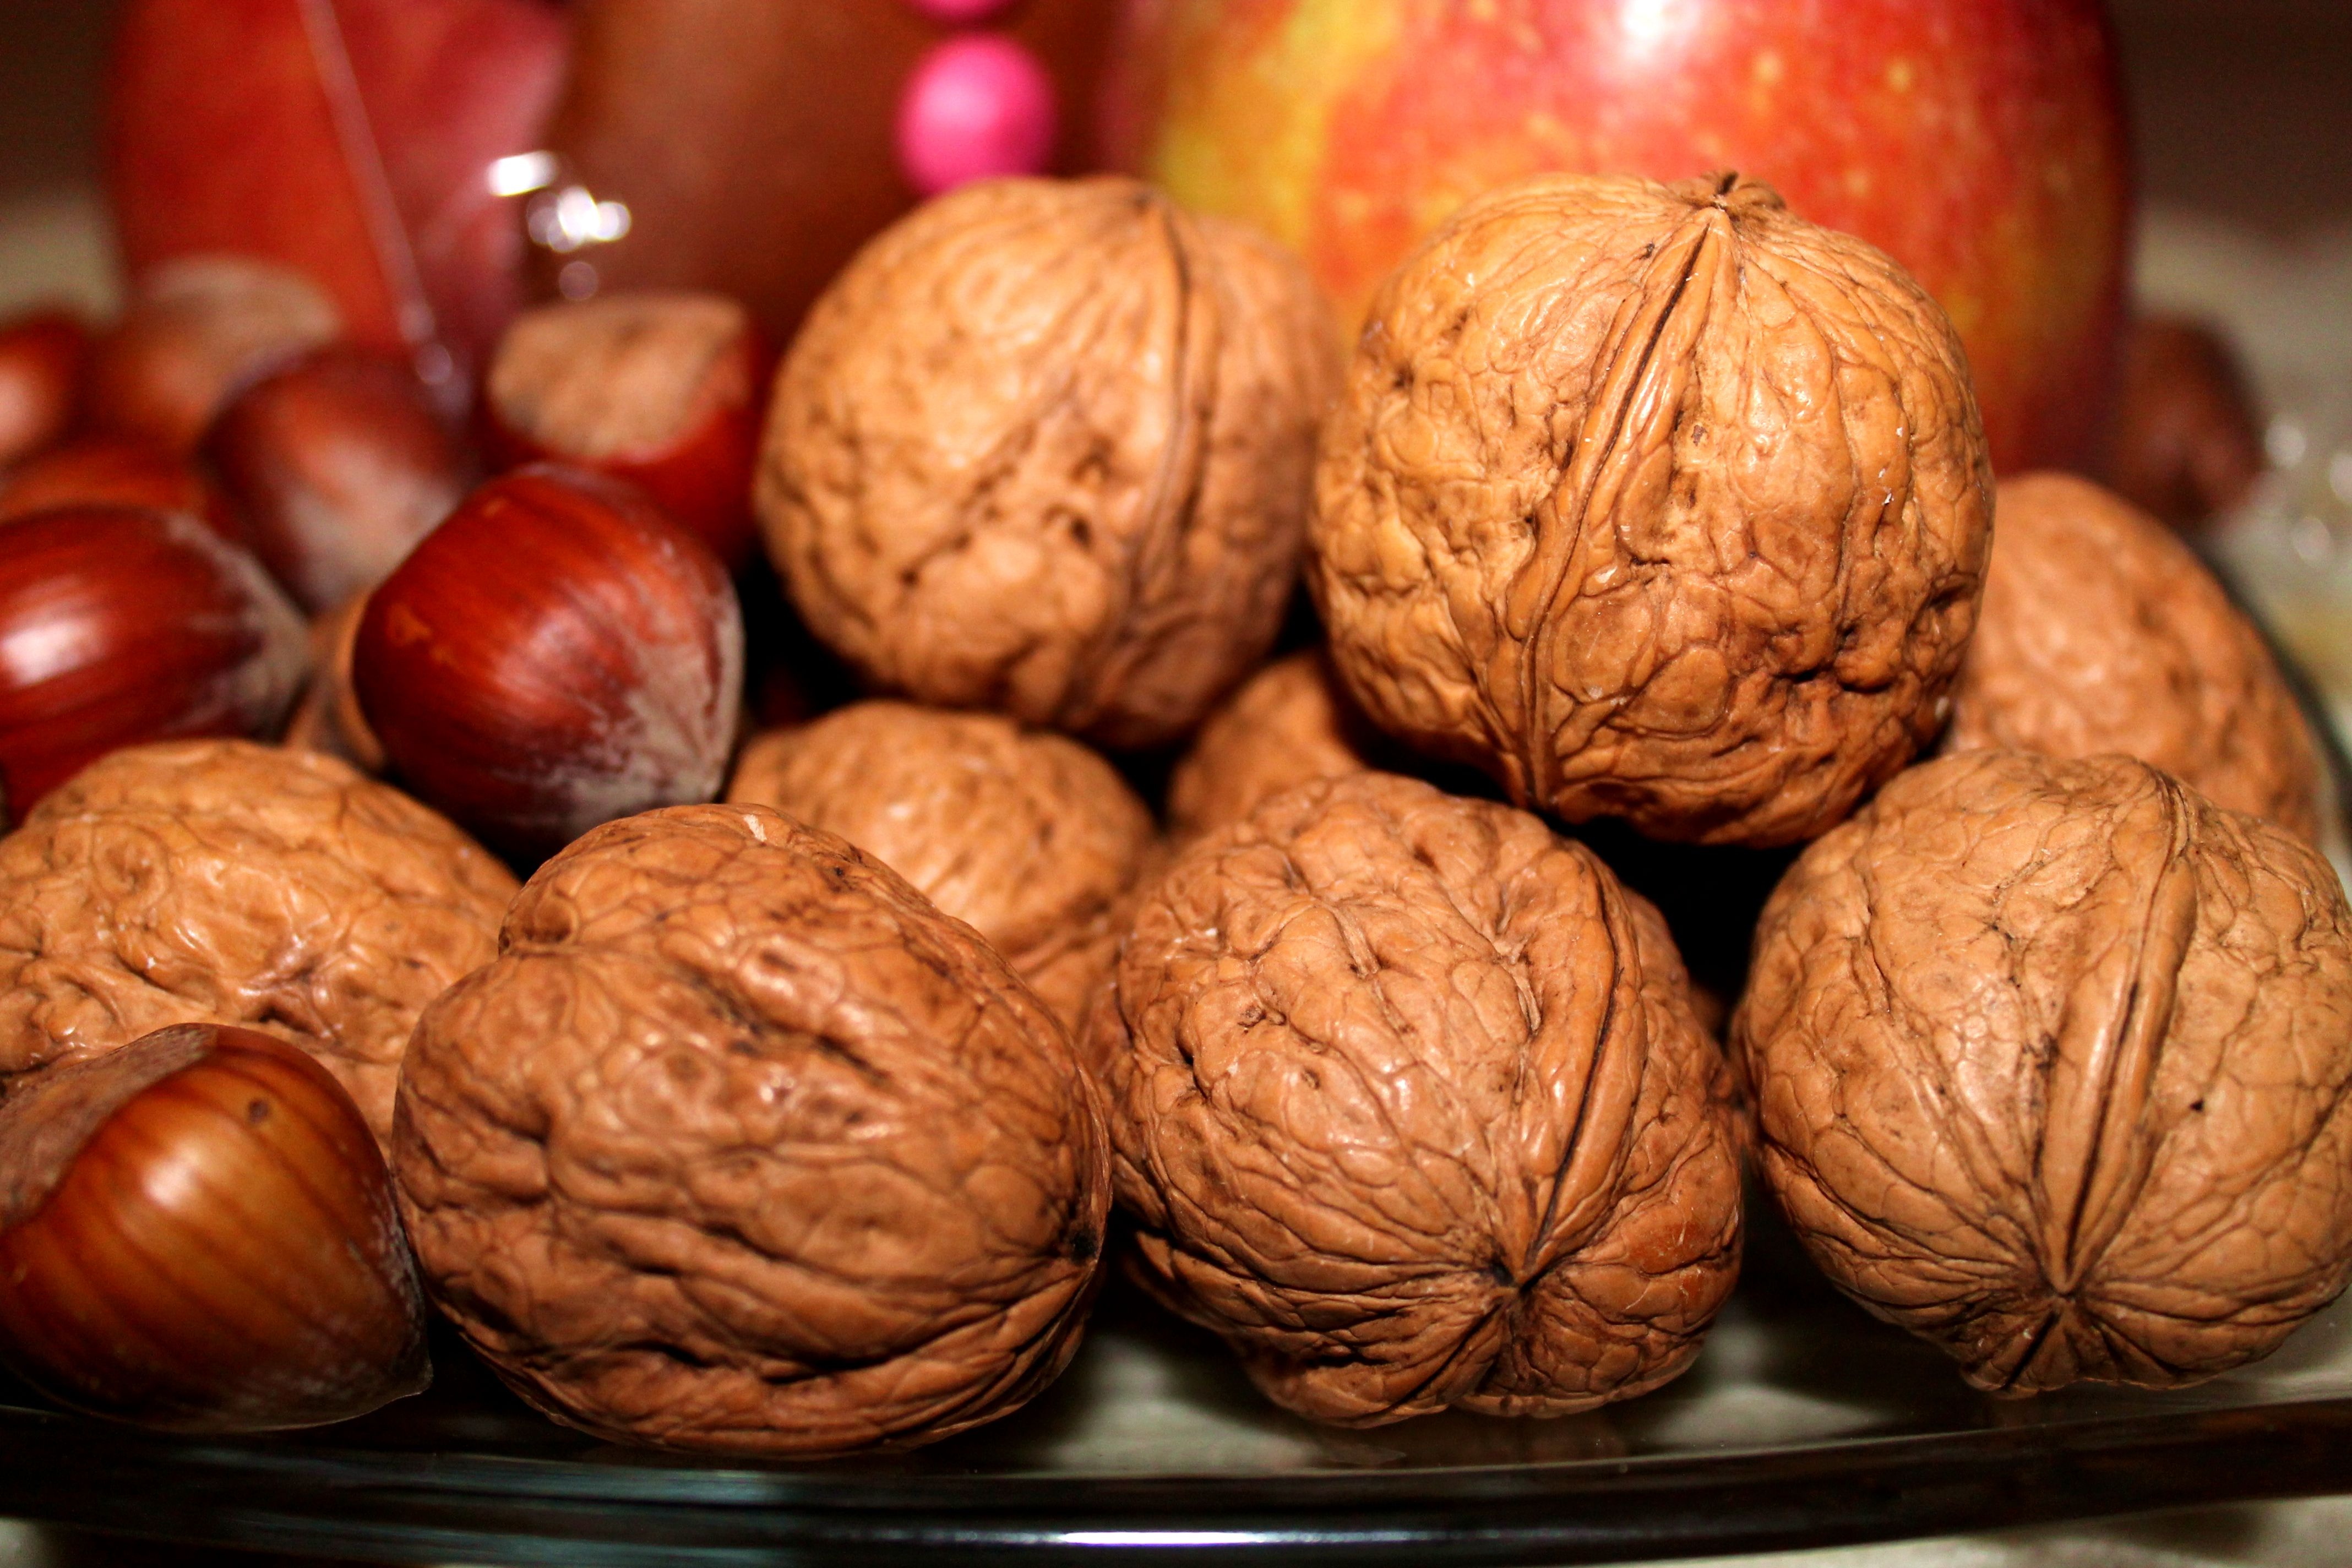 Popular Walnuts images for mobile phone